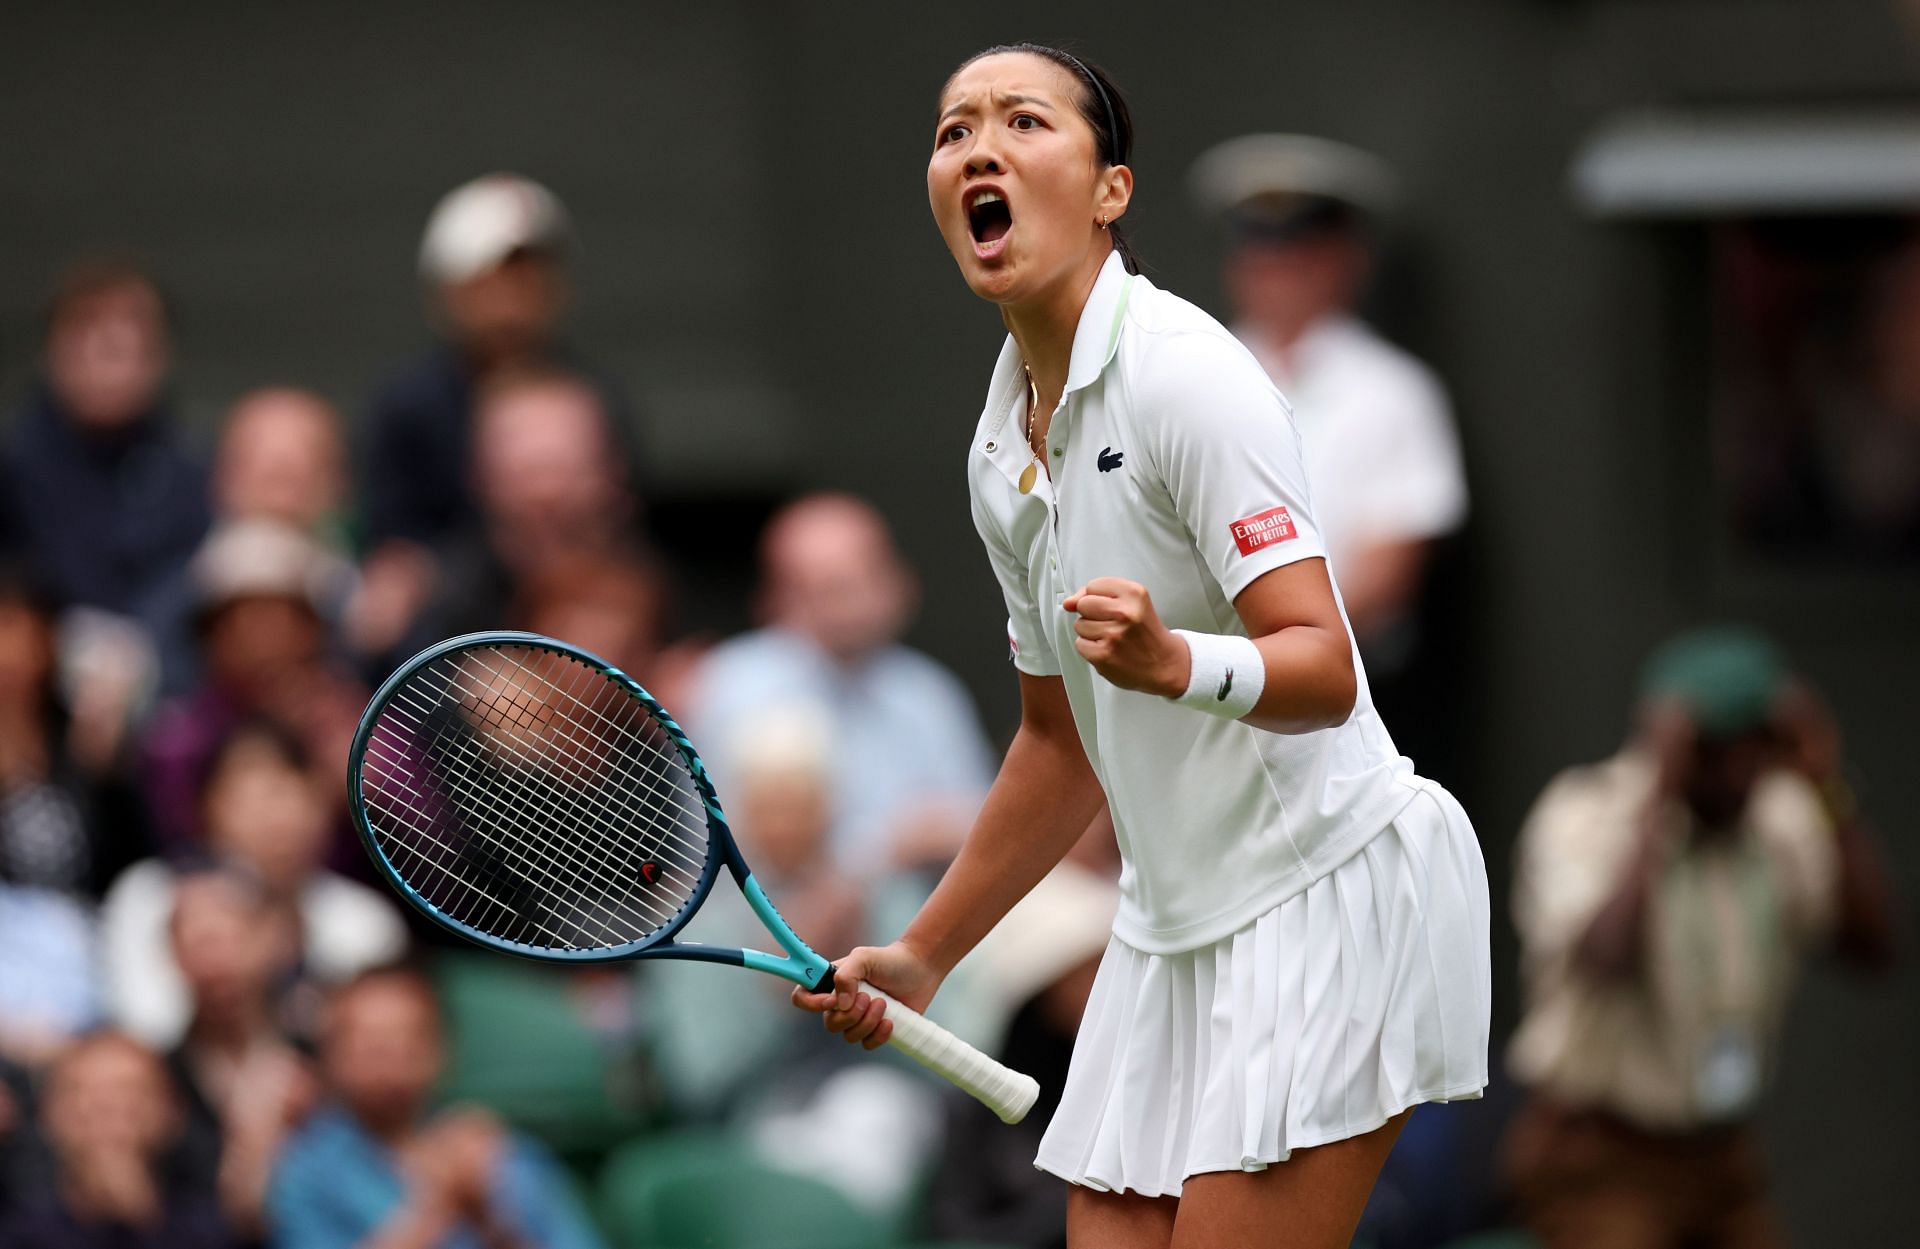 Harmony Tan takes on Sara Sorribes Tormo in the second round at Wimbledon